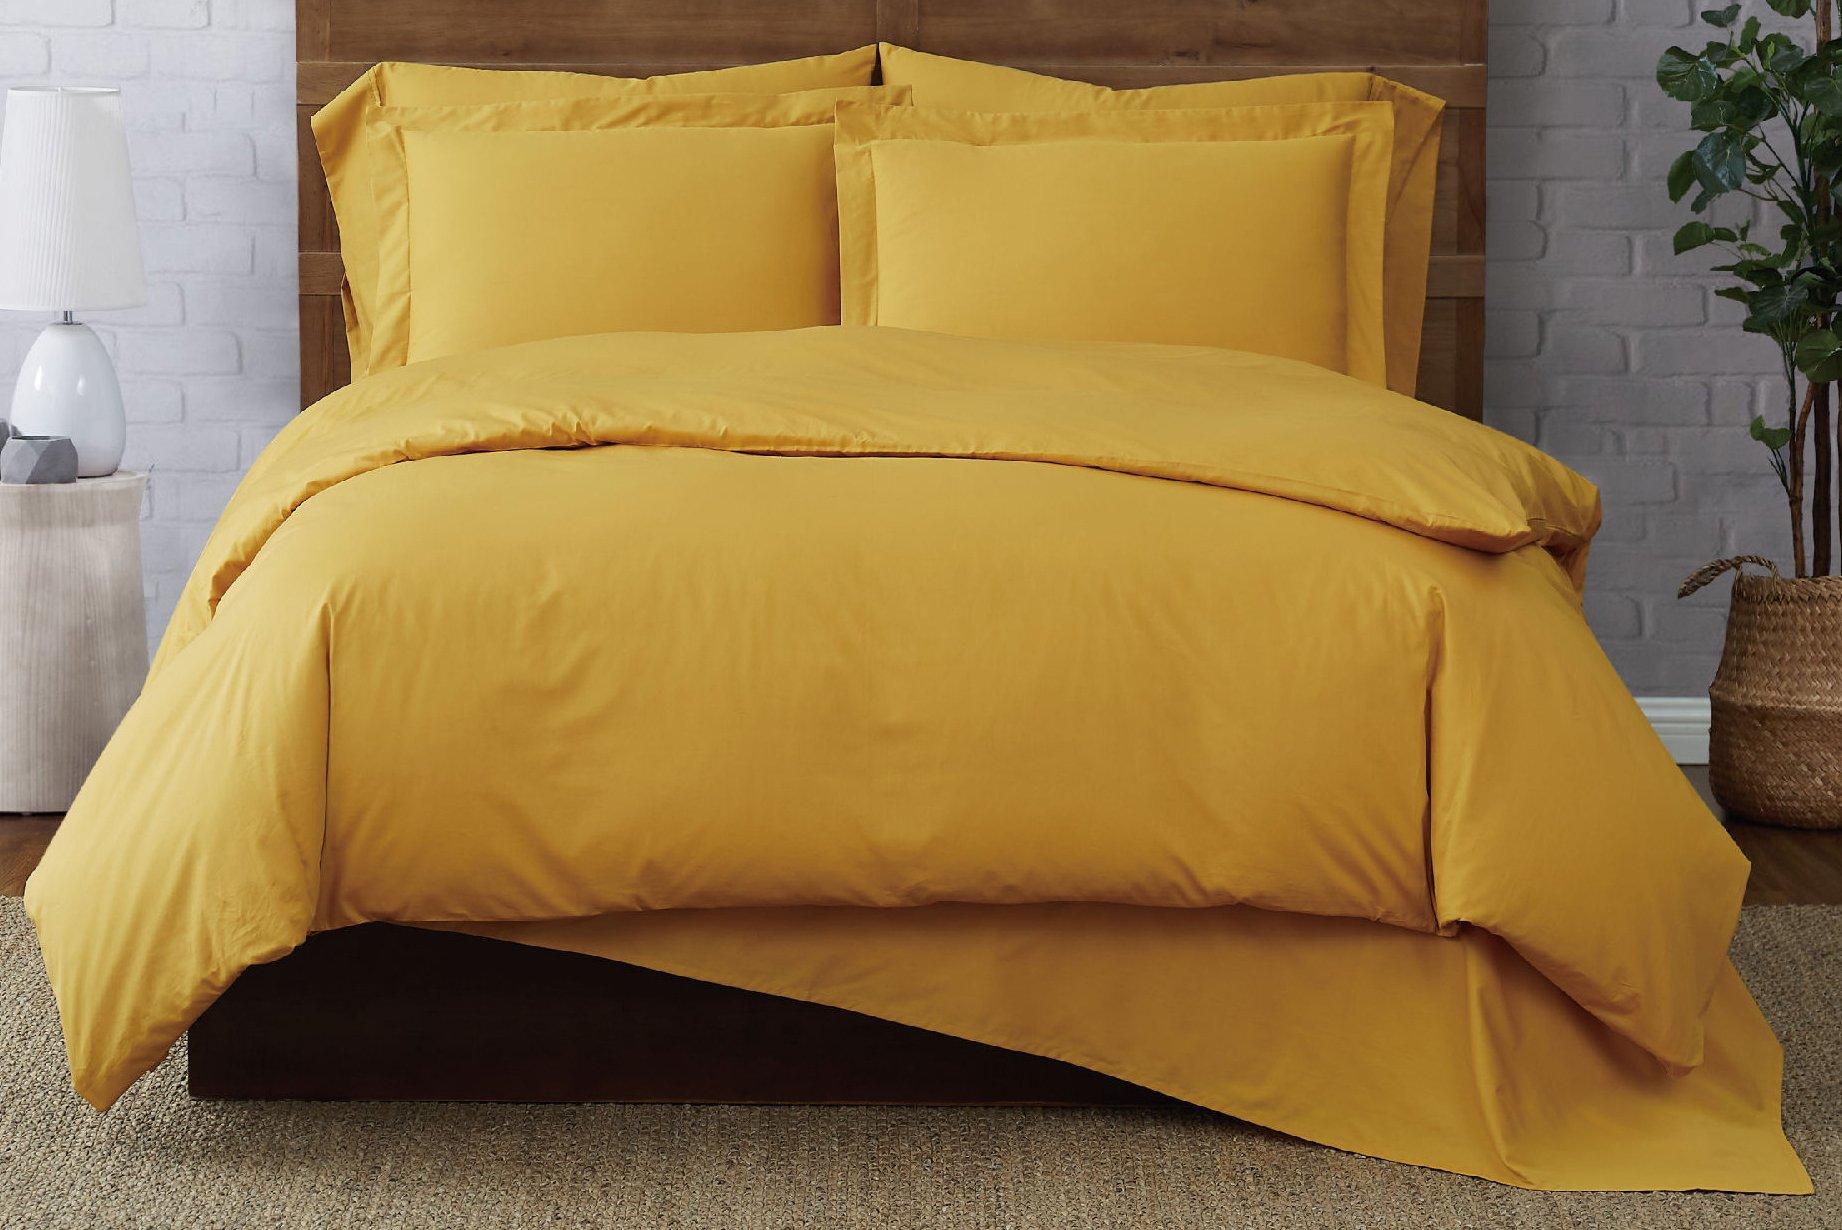 Brooklyn Loom Solid Cotton Percale Duvet Cover Set